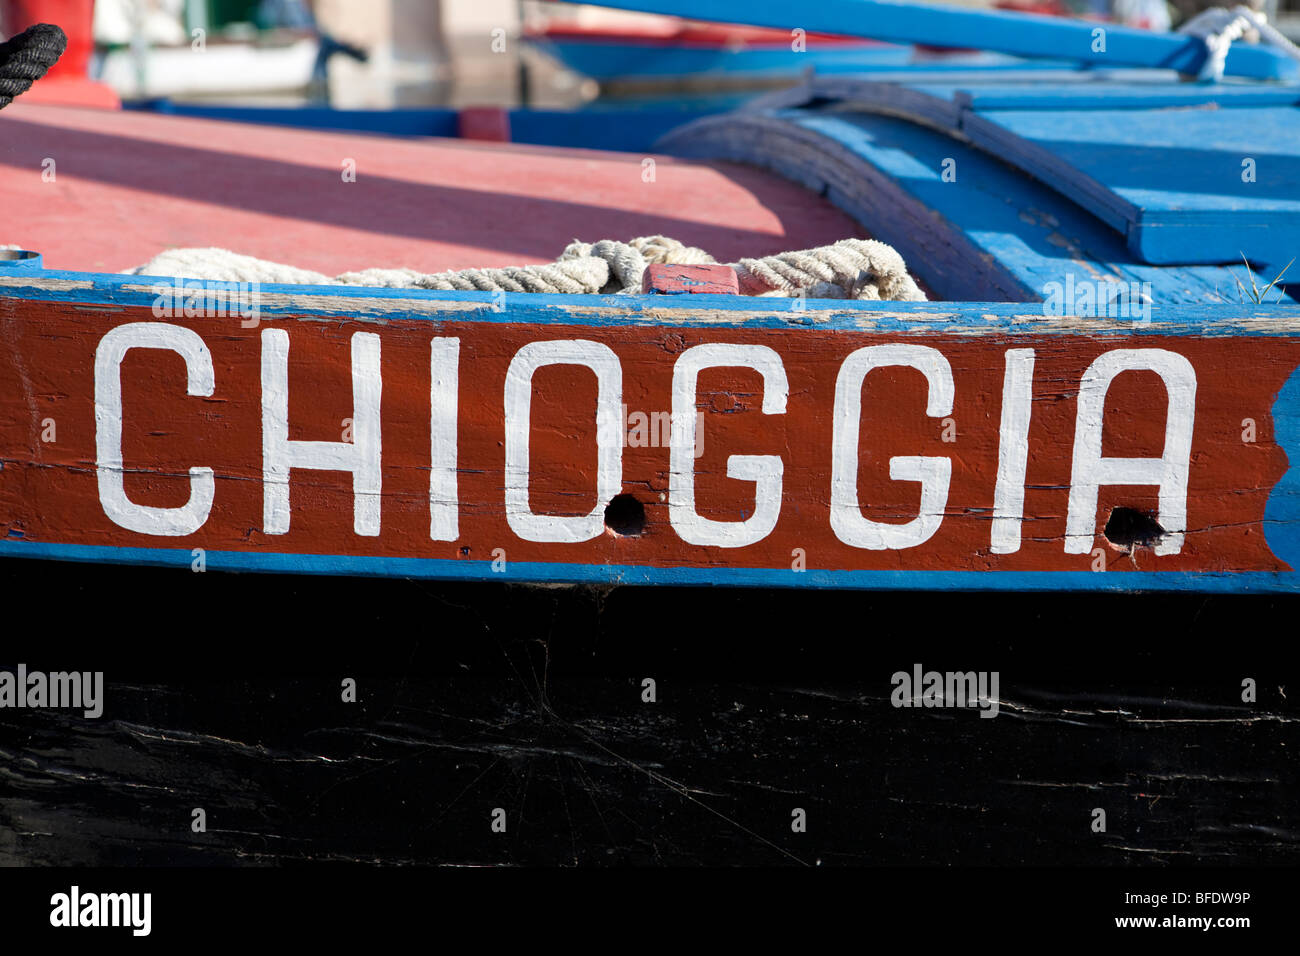 Old wooden fishing boat named after the town of Chioggia, Veneto, Italy Stock Photo